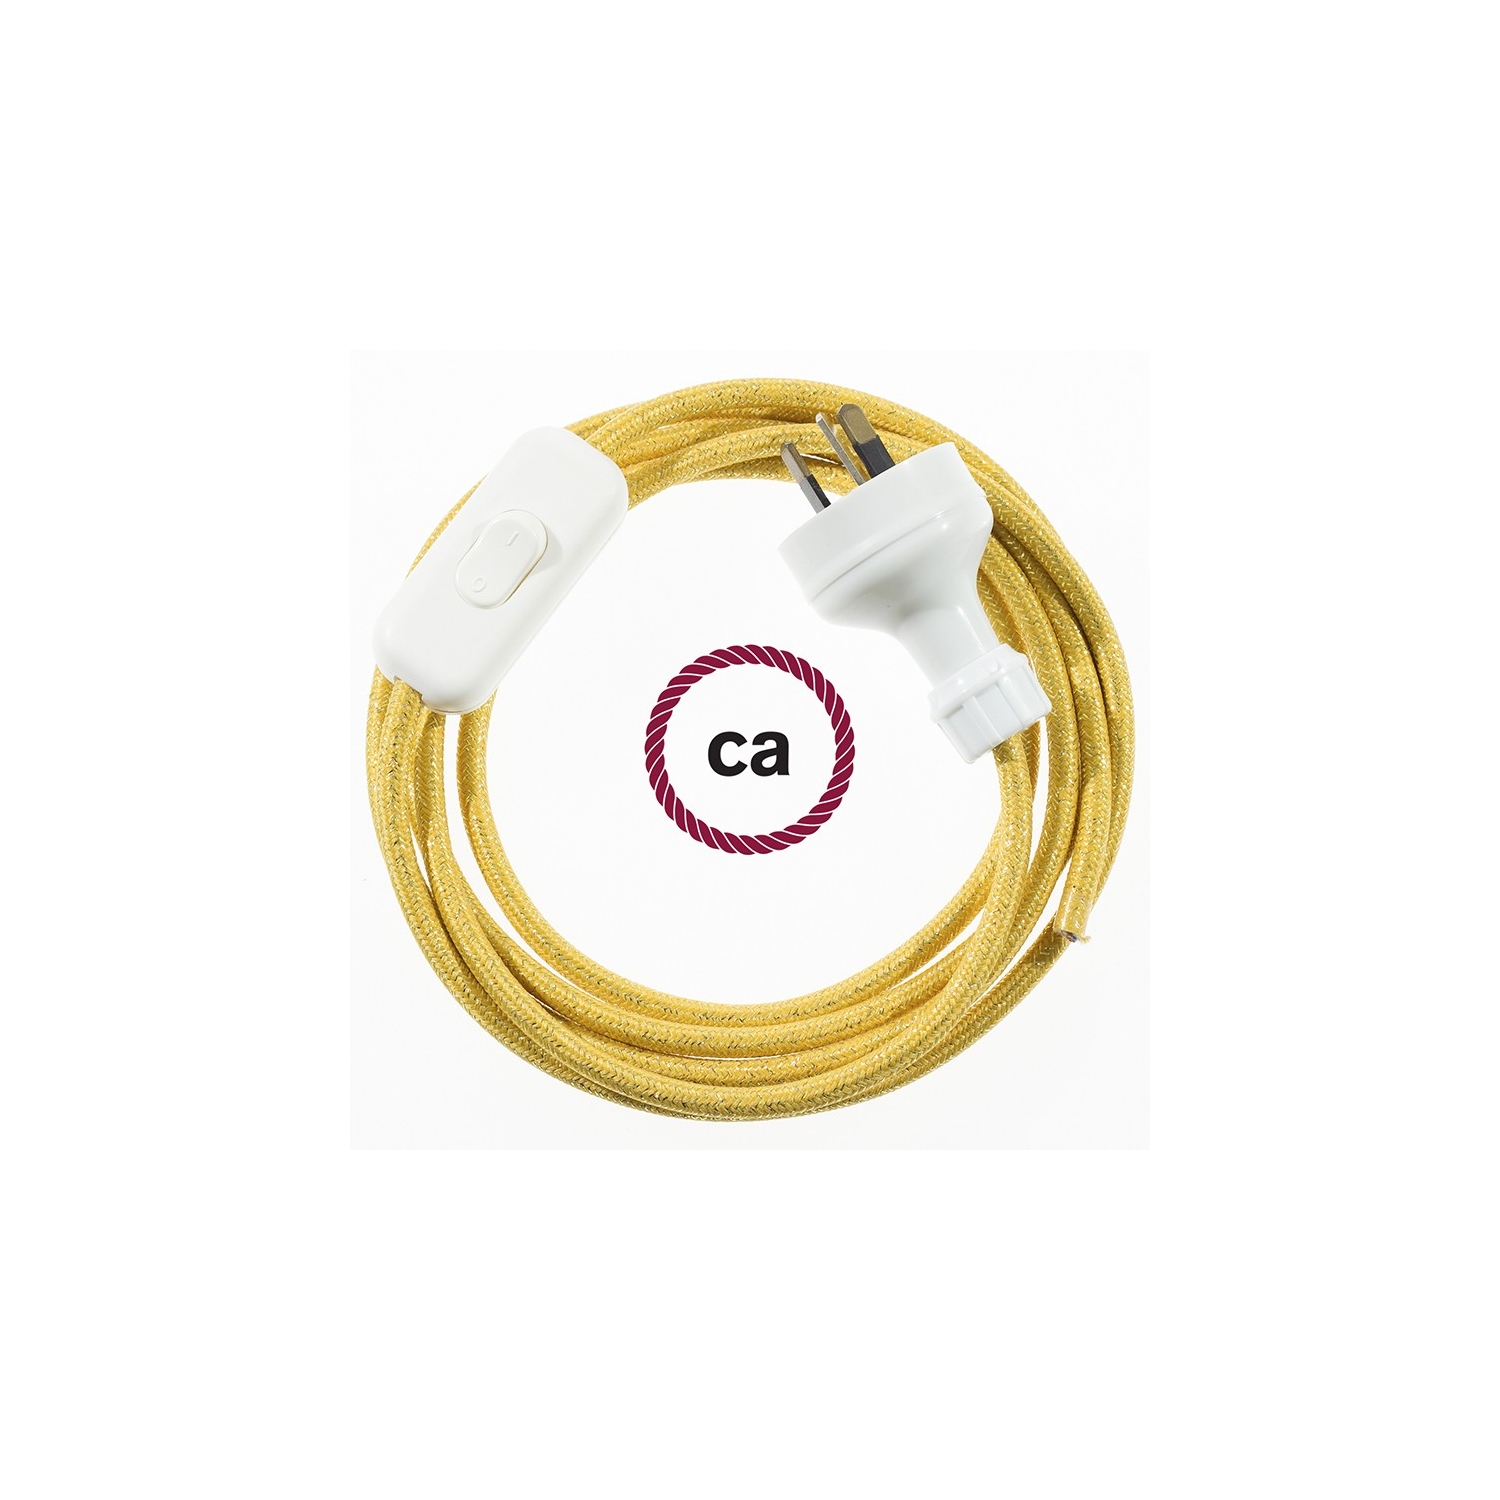 Wiring Glittering Gold textile cable RL05 - 1.80 mt